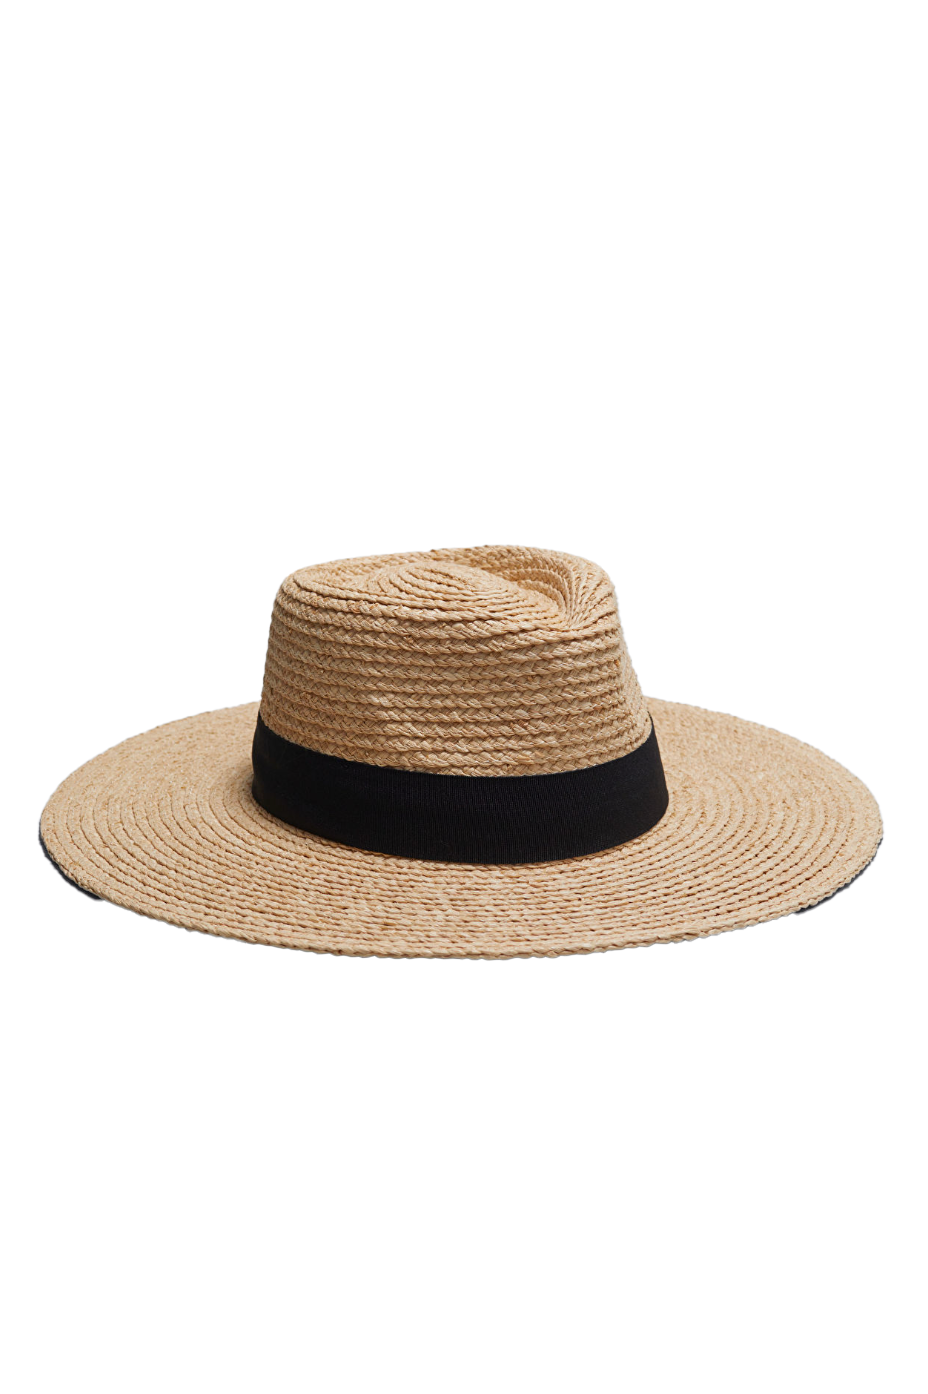 &Other Stories Grosgrain-Trimmed Straw Hat